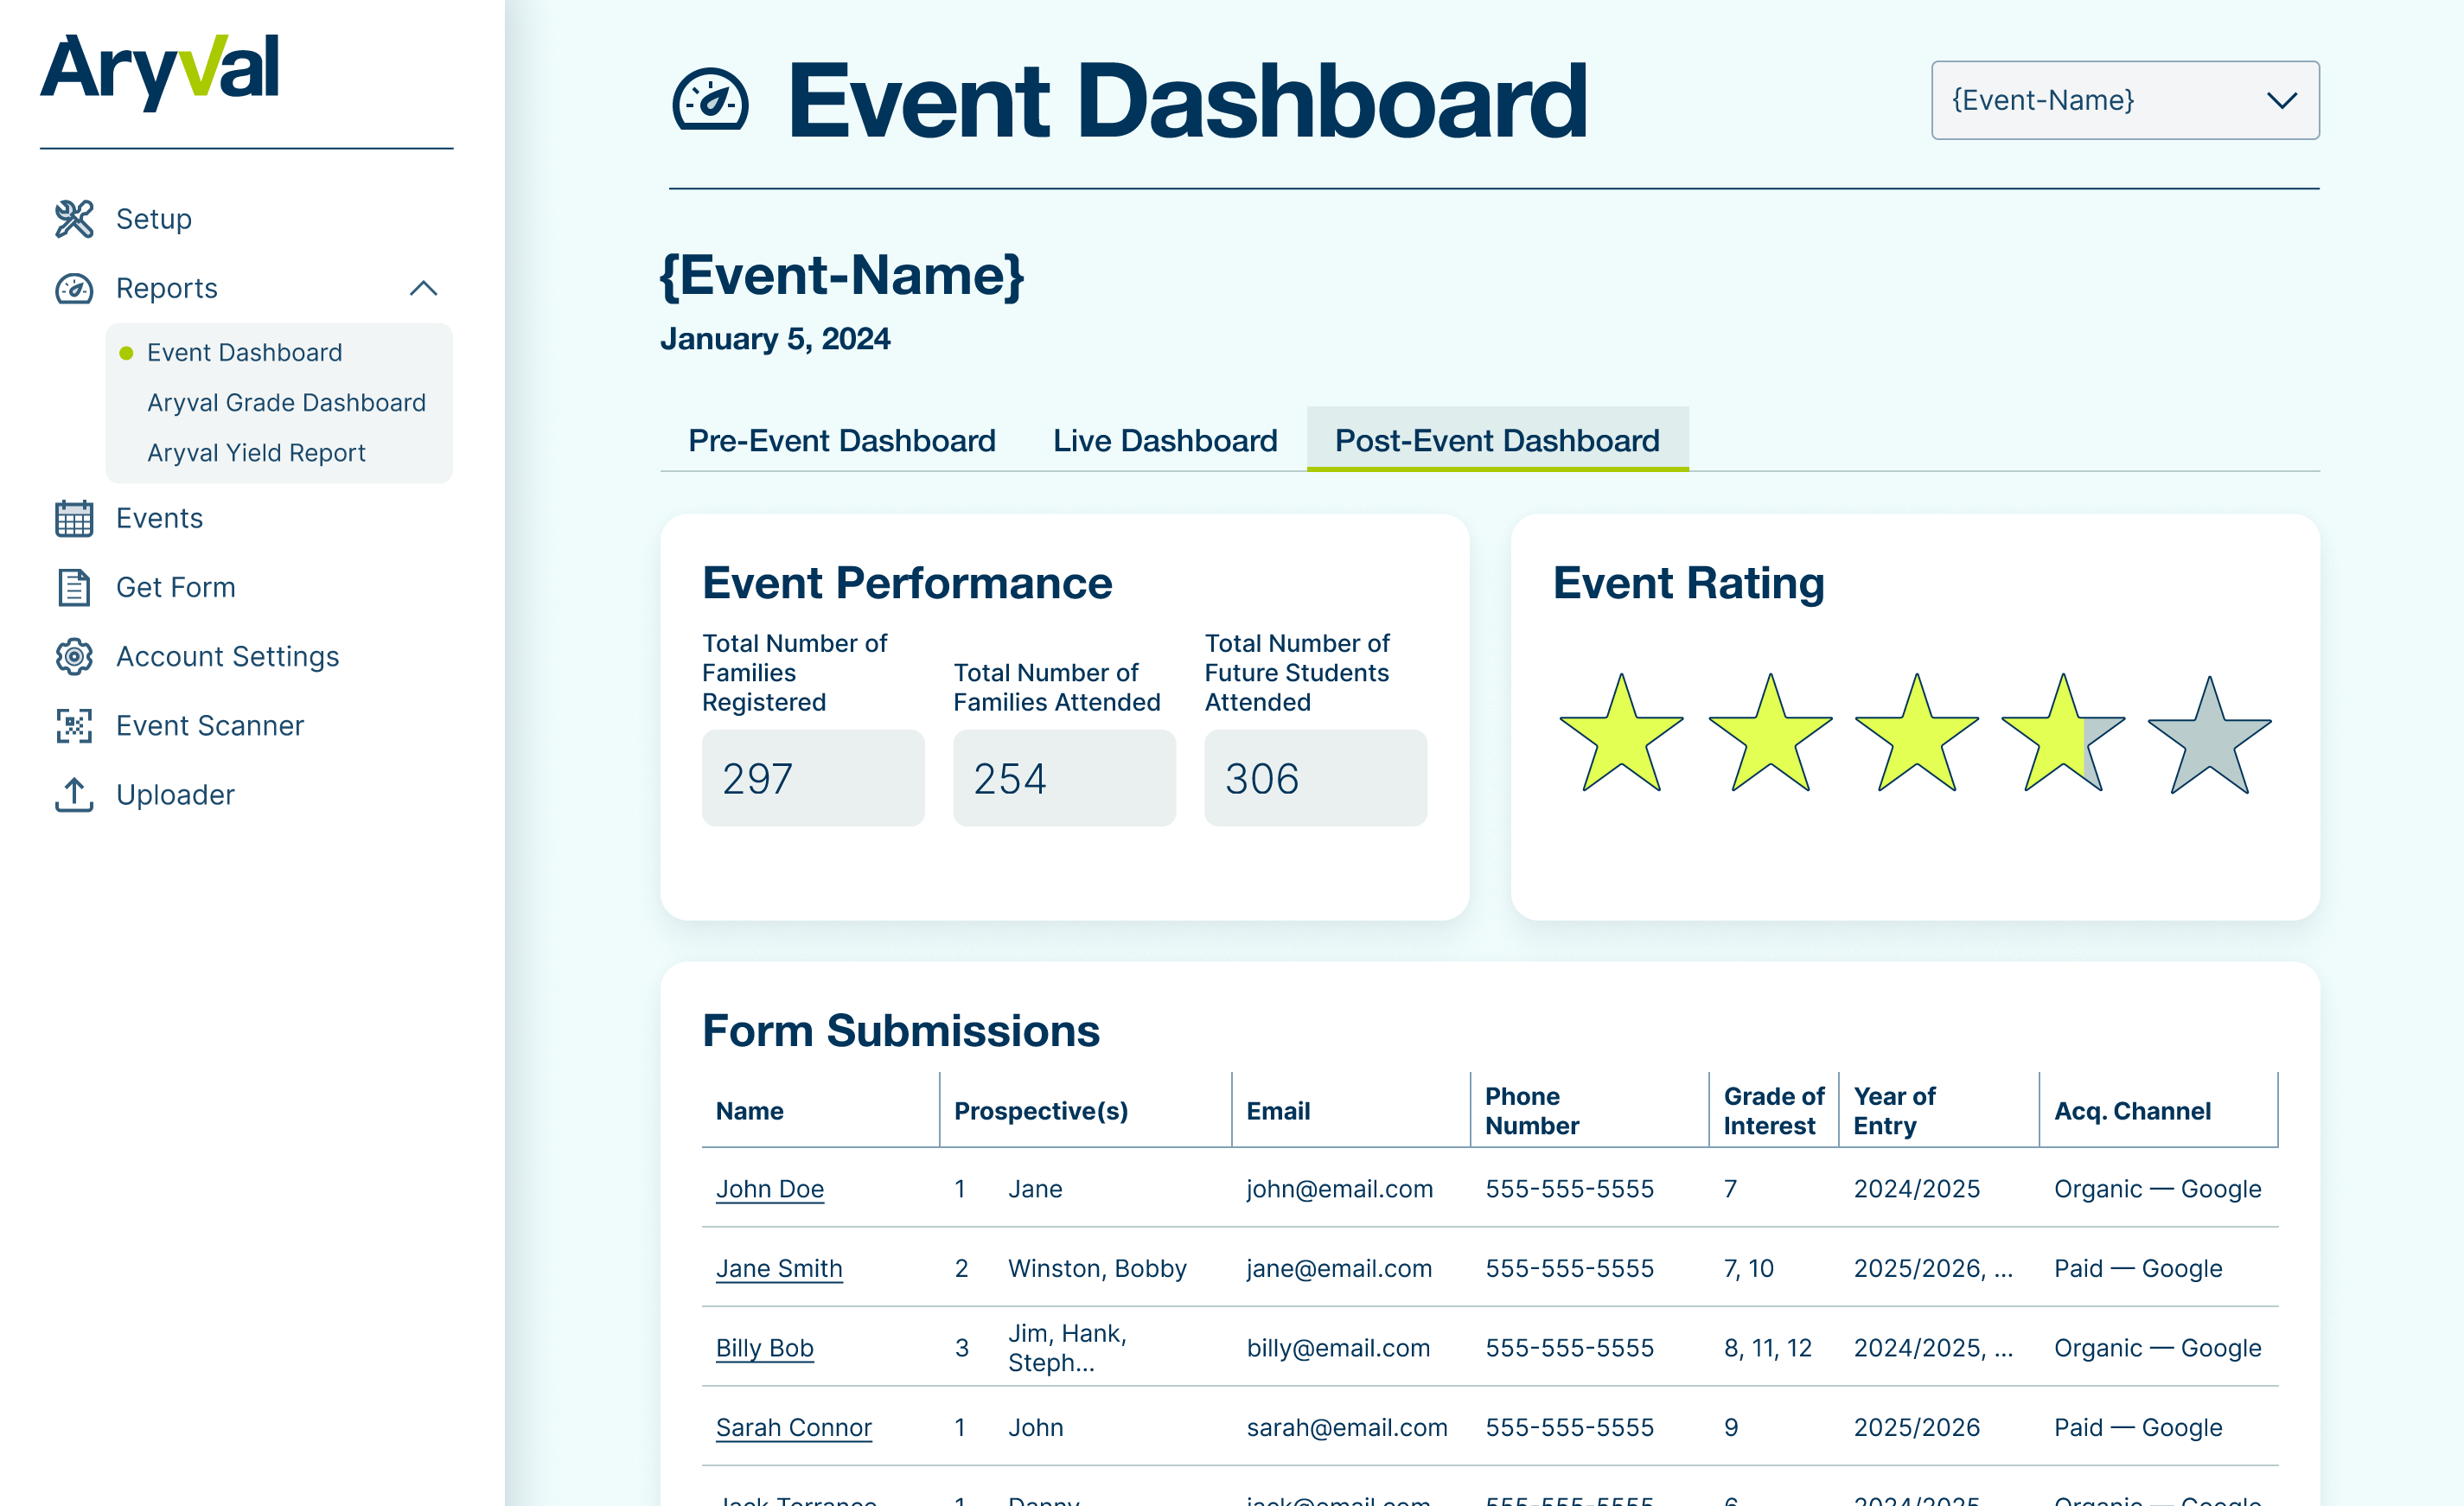 Event dashboard view